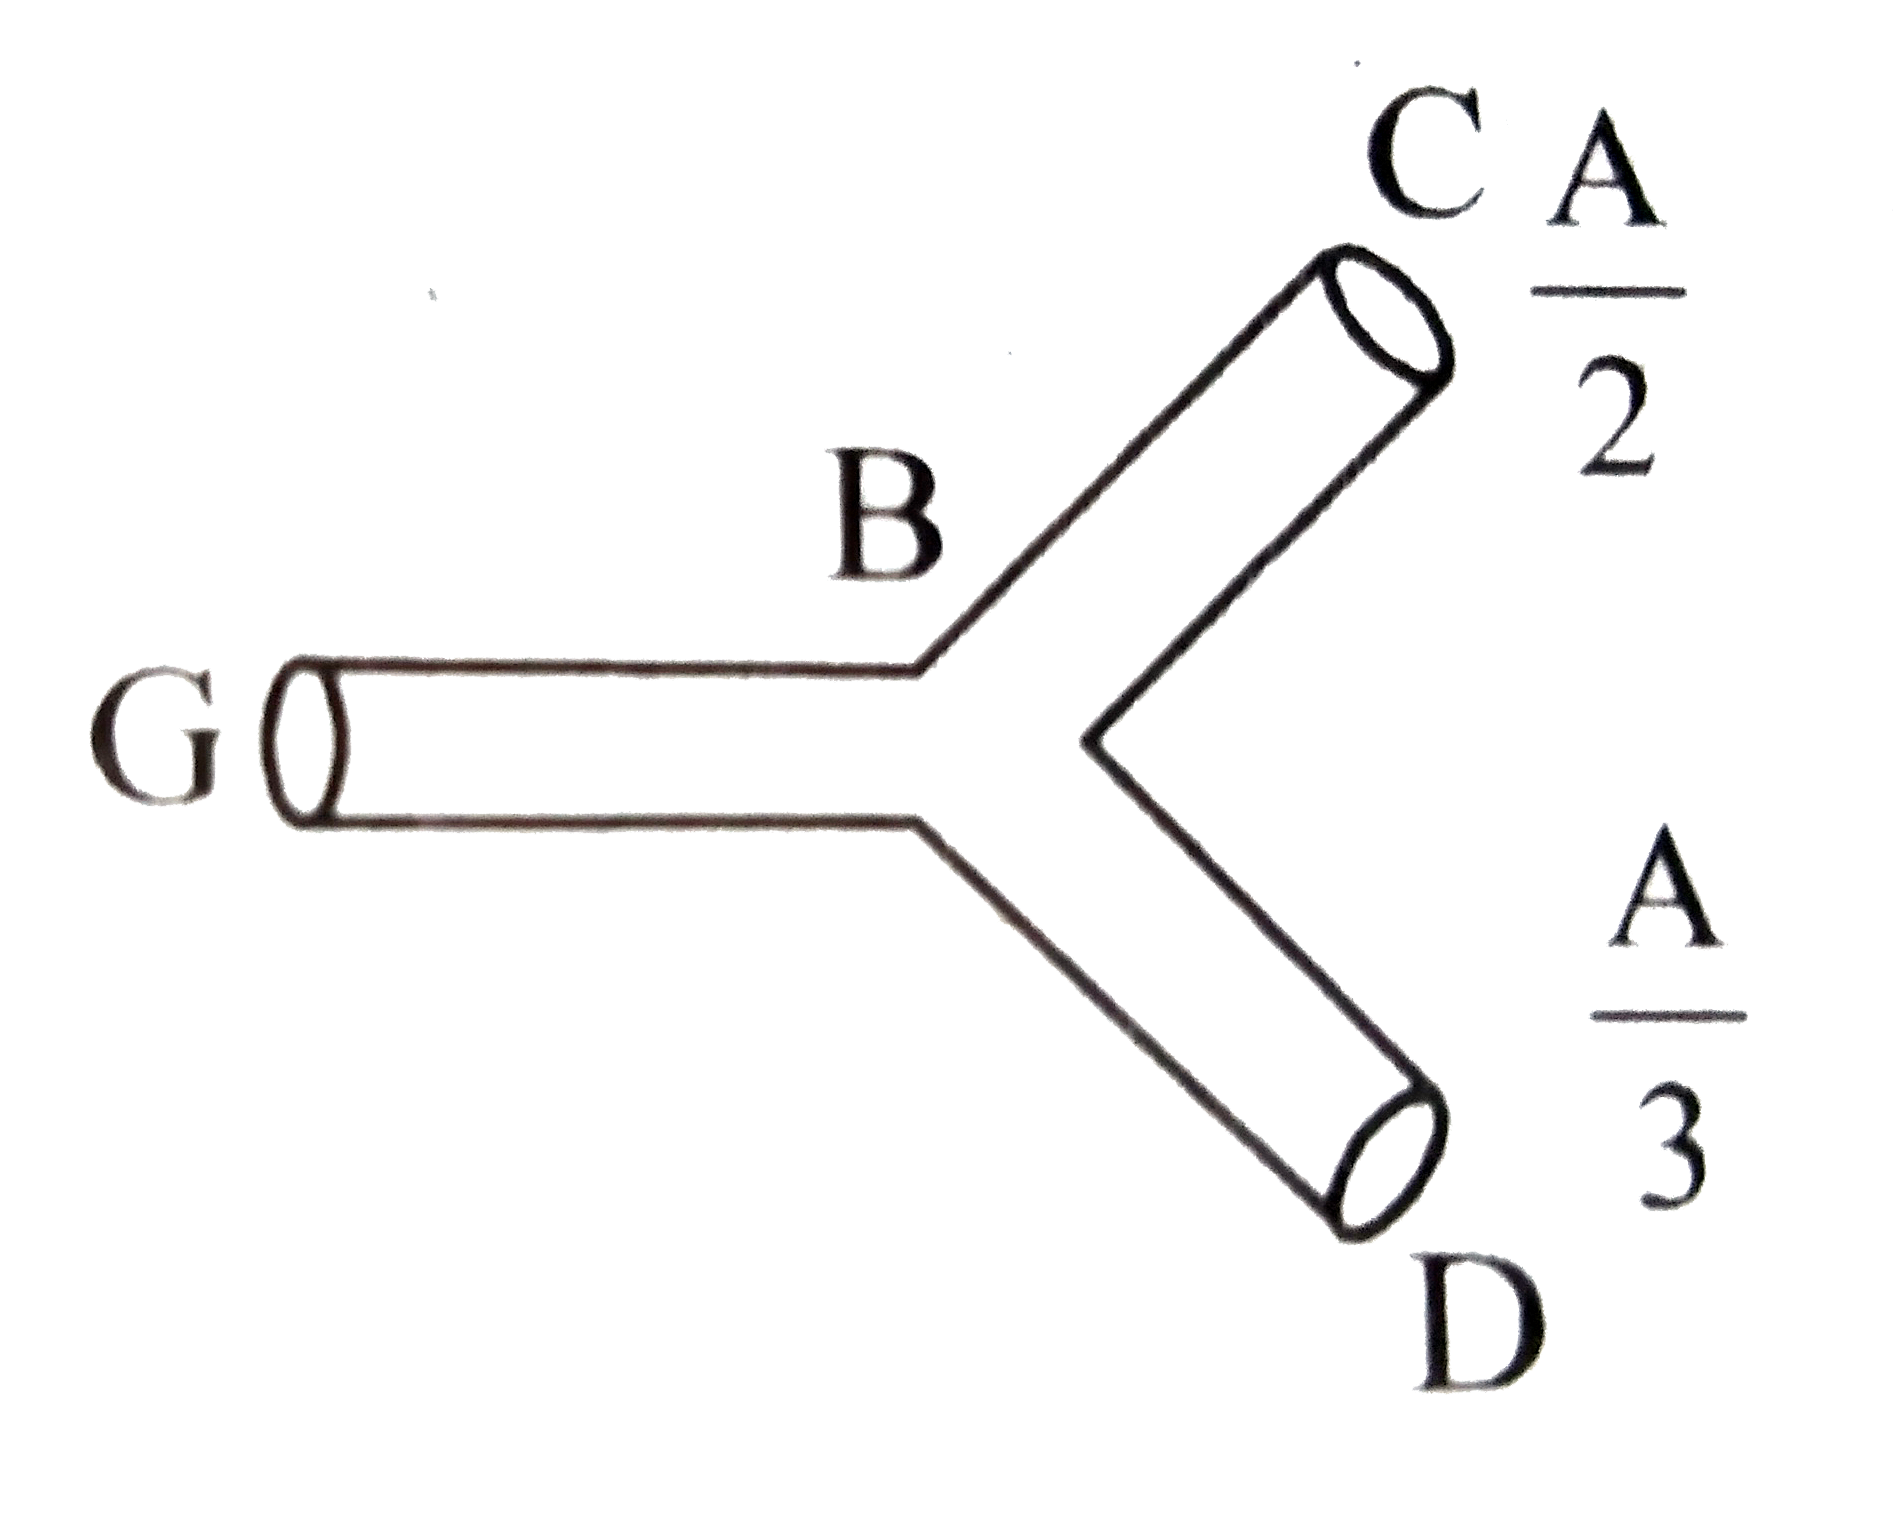 A pipe GB is fitted with two pipes C and D as shown in the figure. The pipe has area   A =24 m^(2) at G and velocity of water at G is 10 m/s, and at C is 6 m/s. The velocity of water at D is